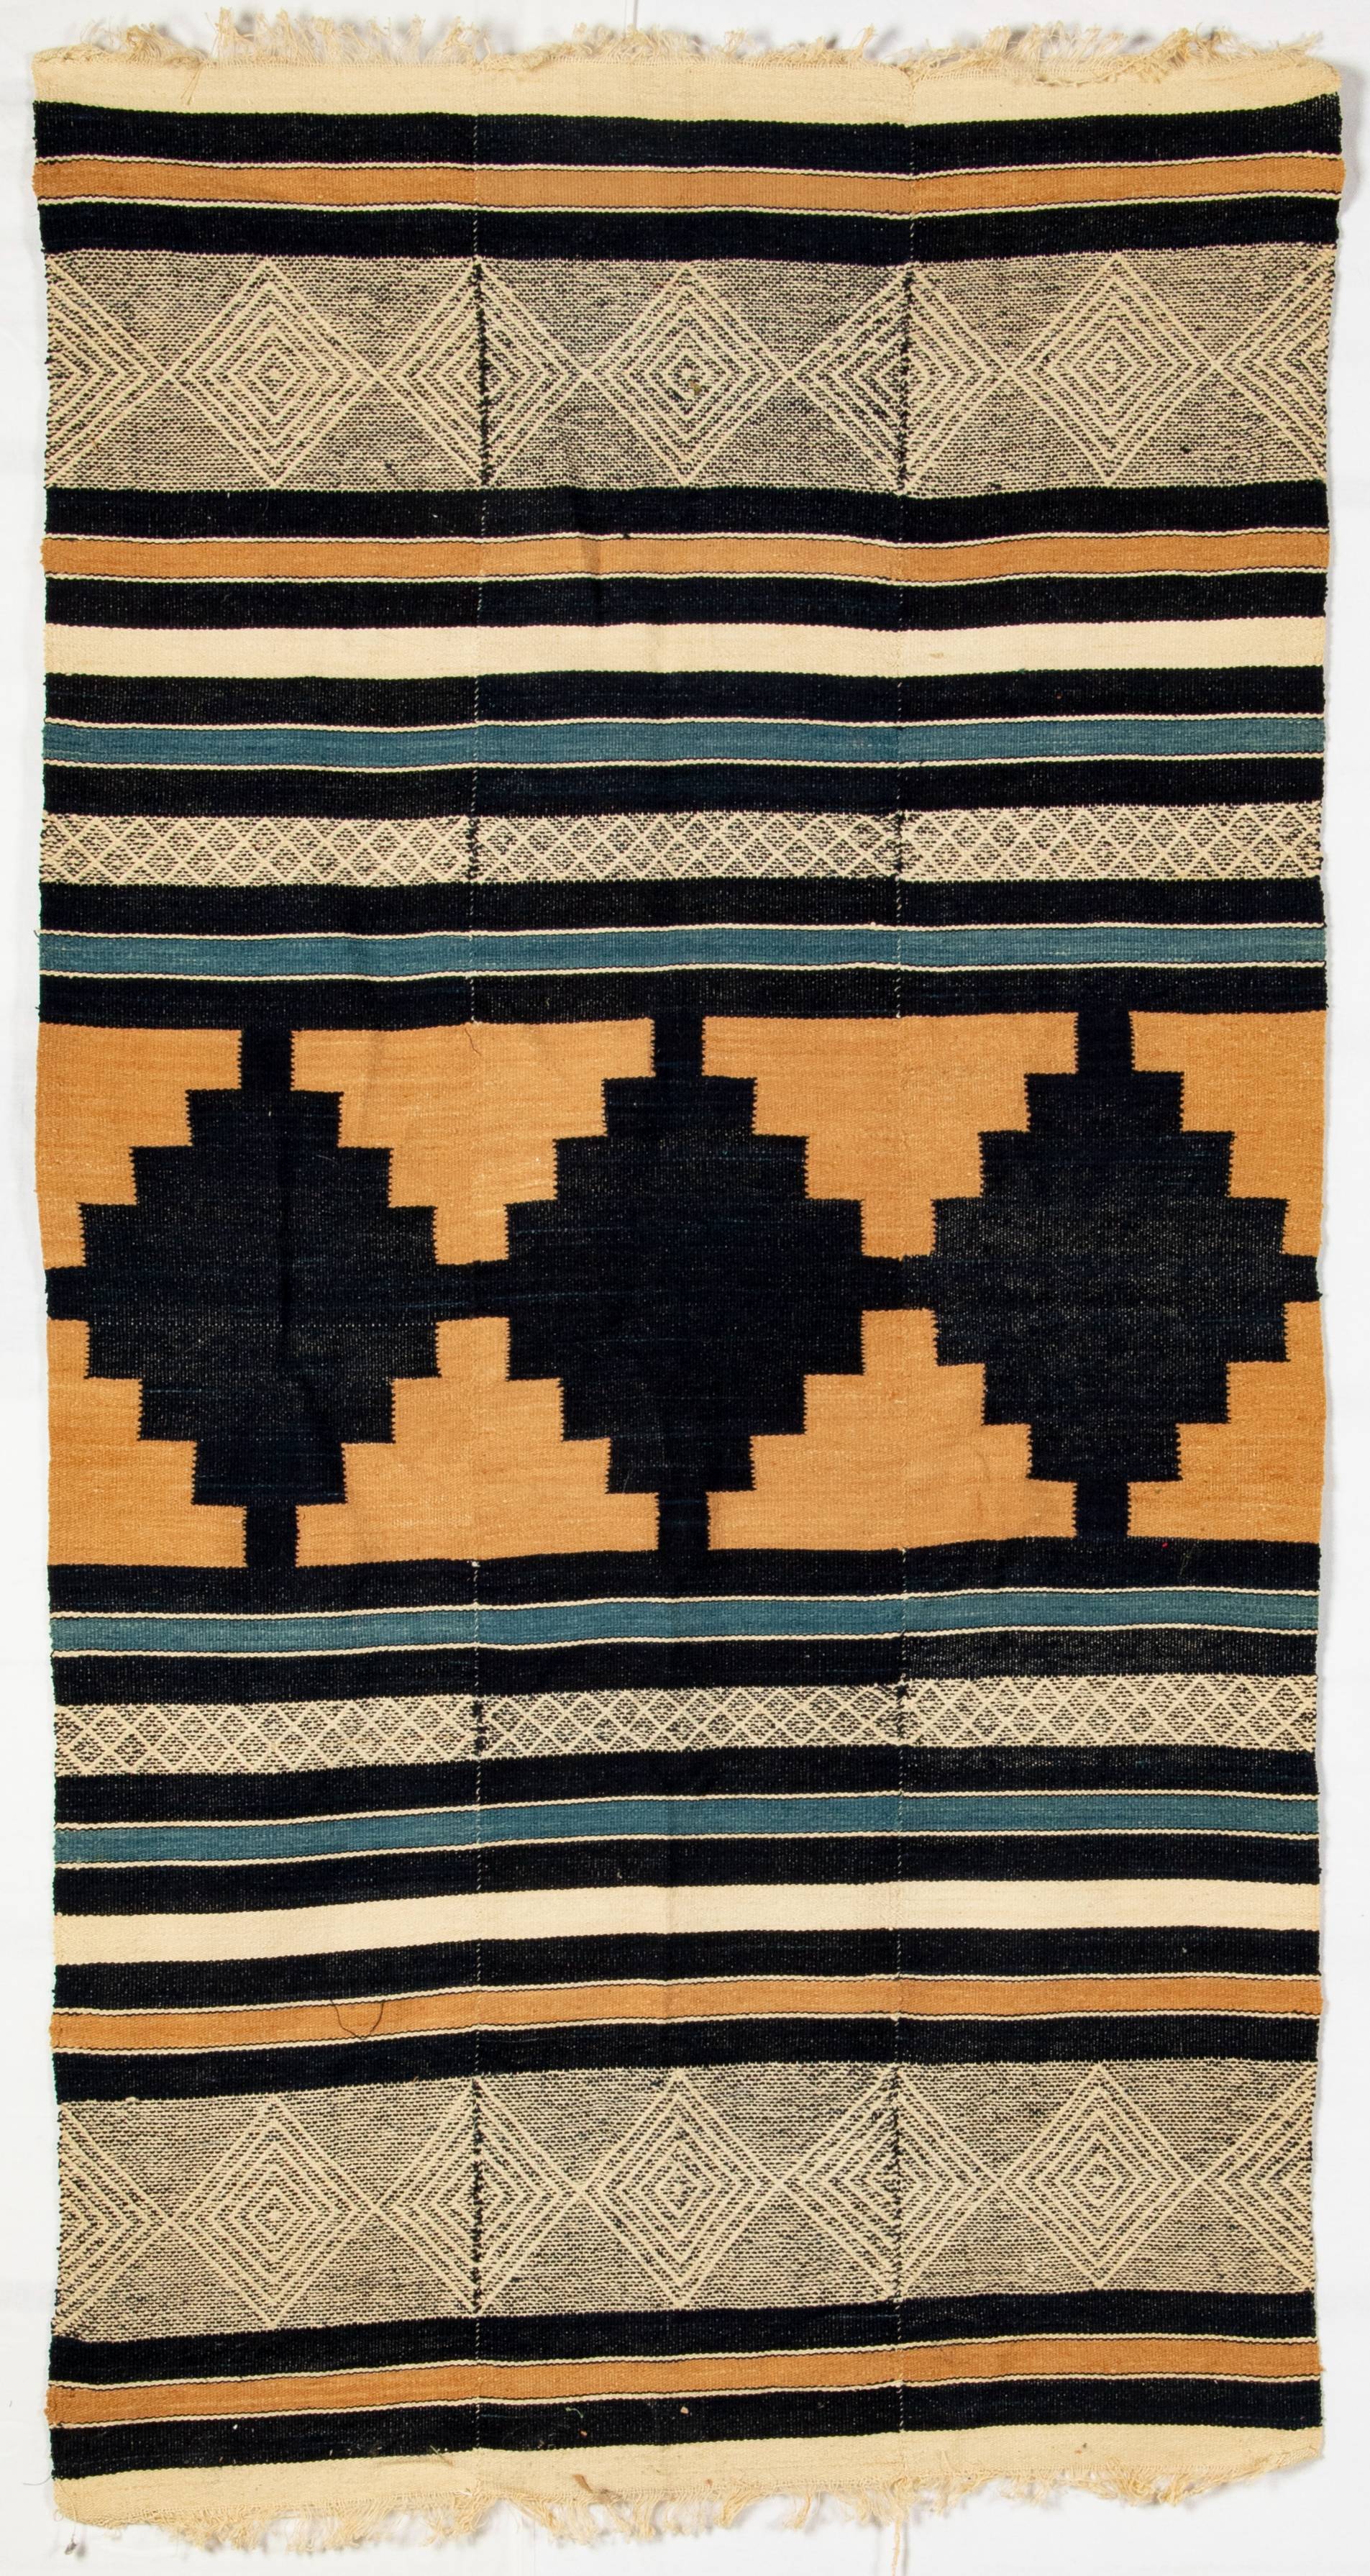 woven blanket with white, black, teal, and orange geometric patterns